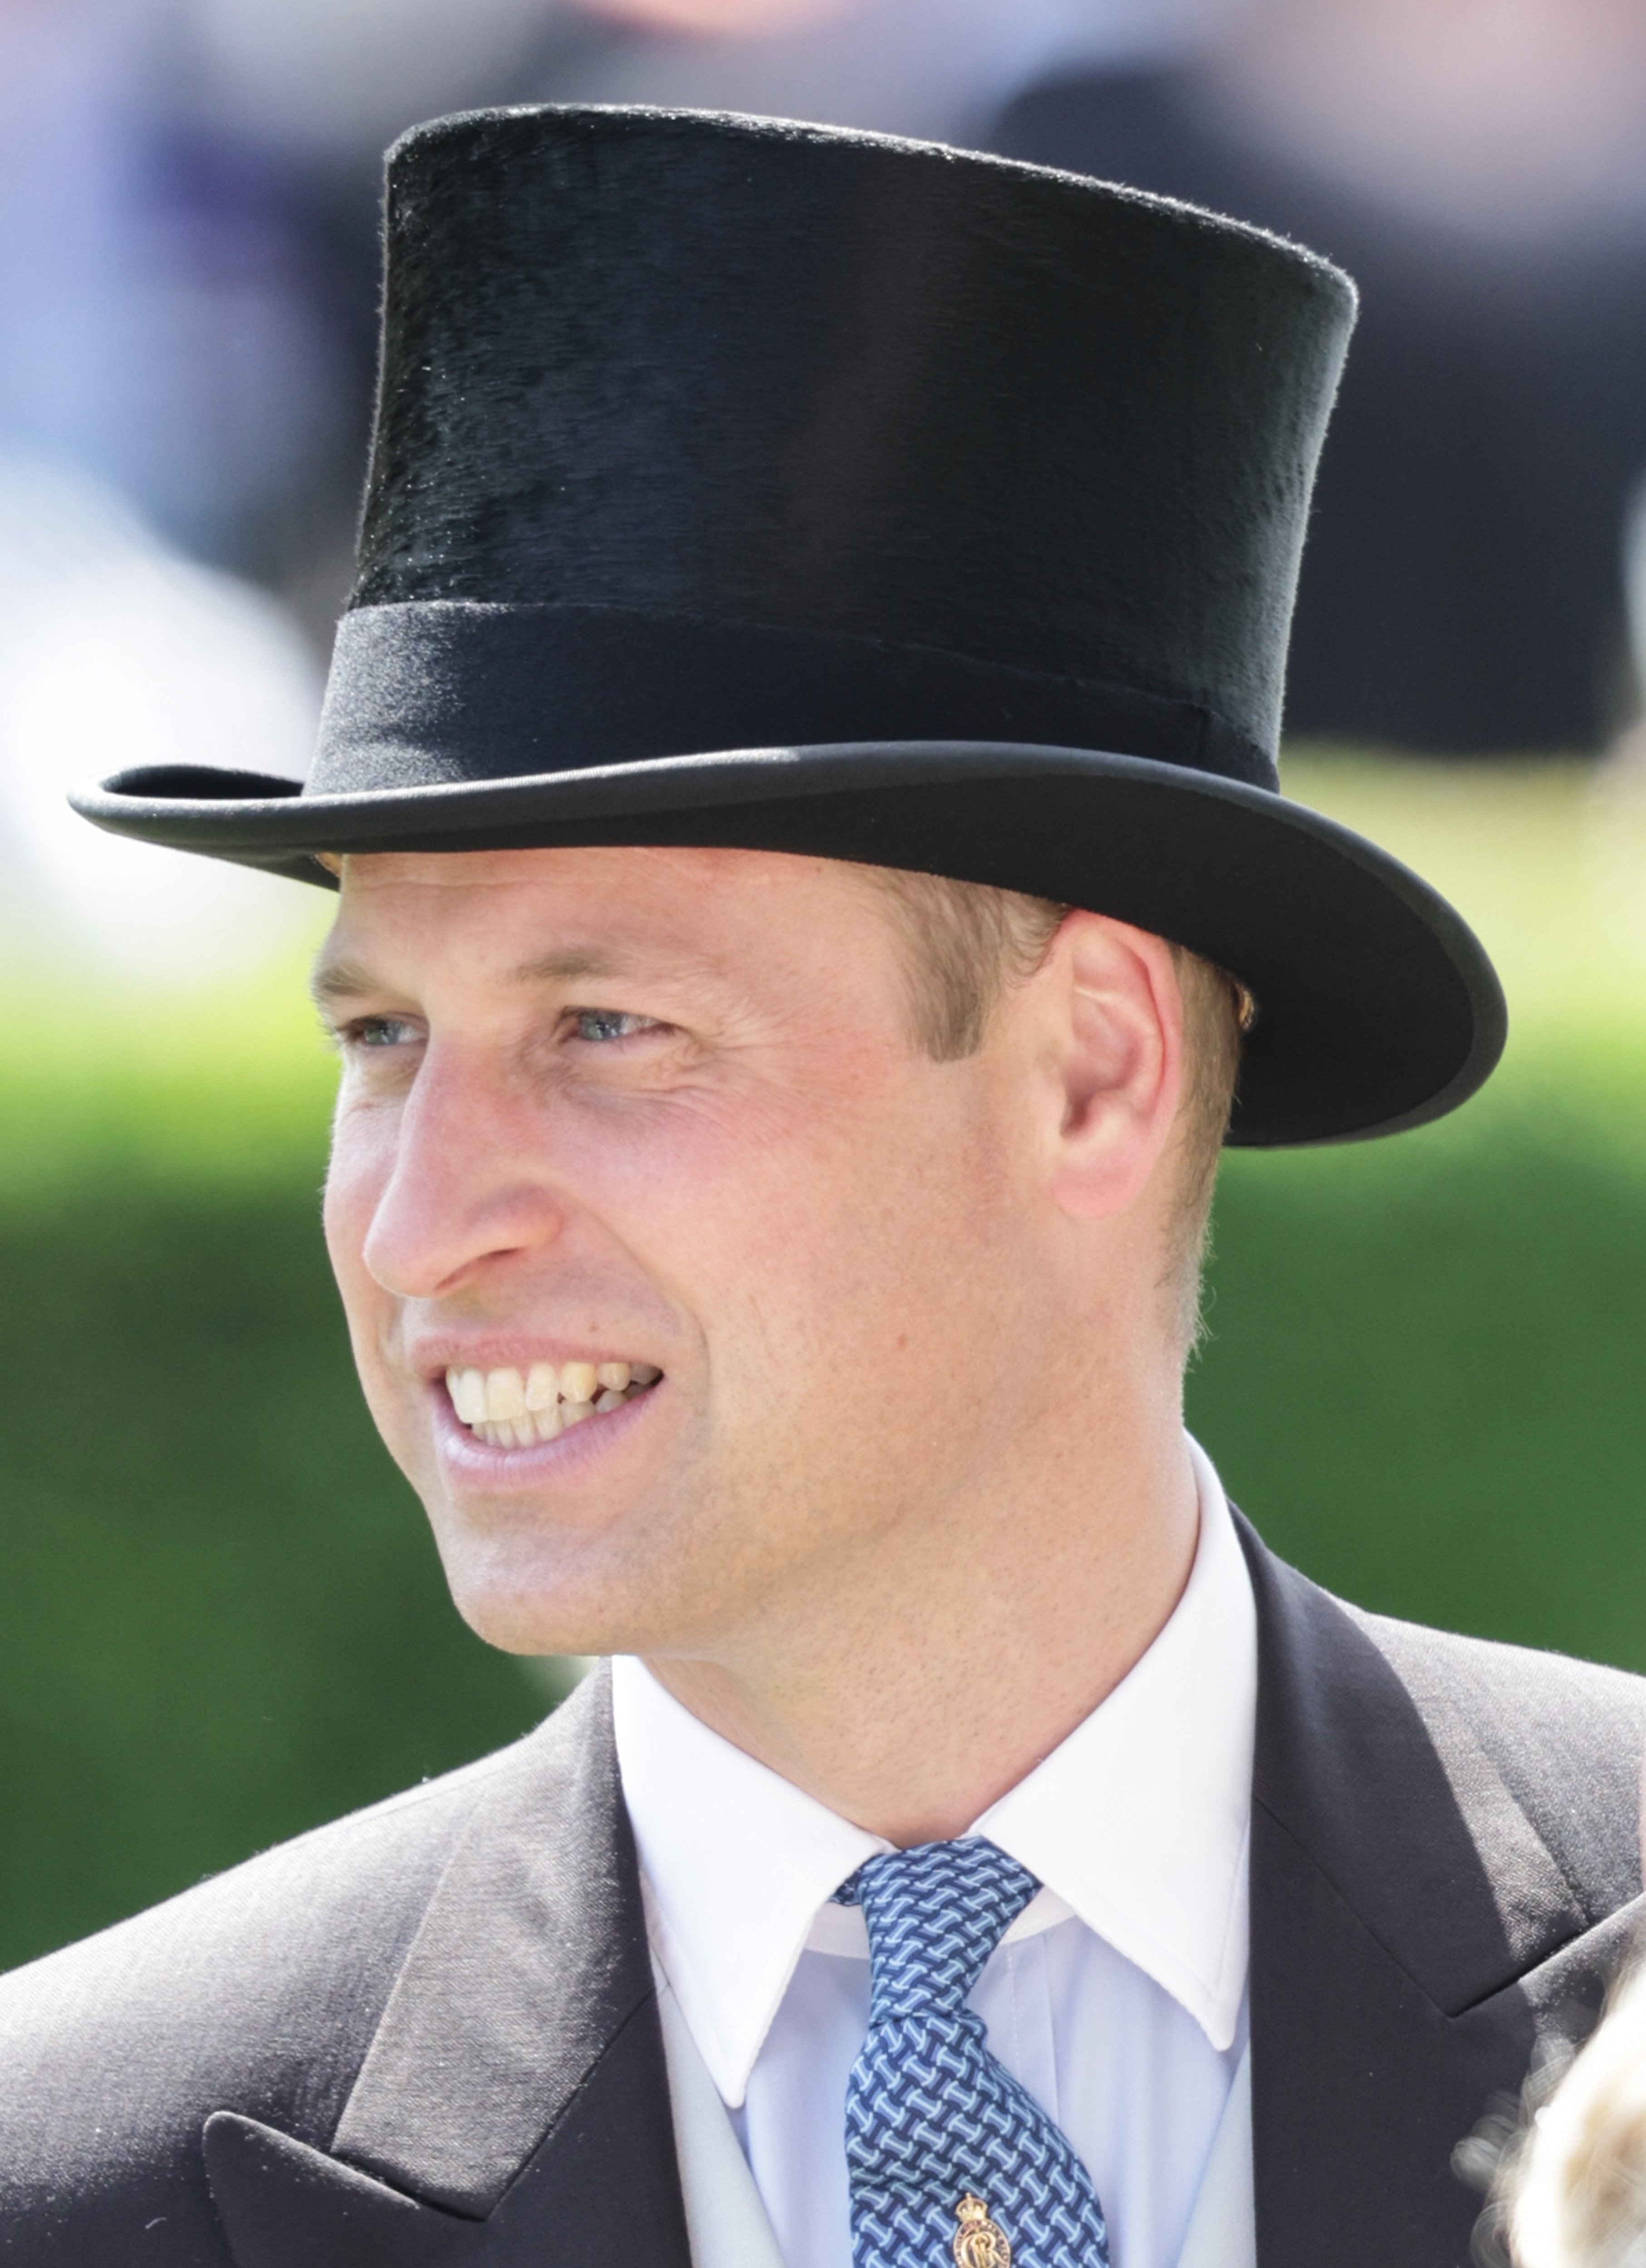 Prince William, Duke of Cambridge, smiles in the parade ring during Royal Ascot 2022 at Ascot Racecourse on June 17, 2022 in Ascot, England. | Source: Getty Images